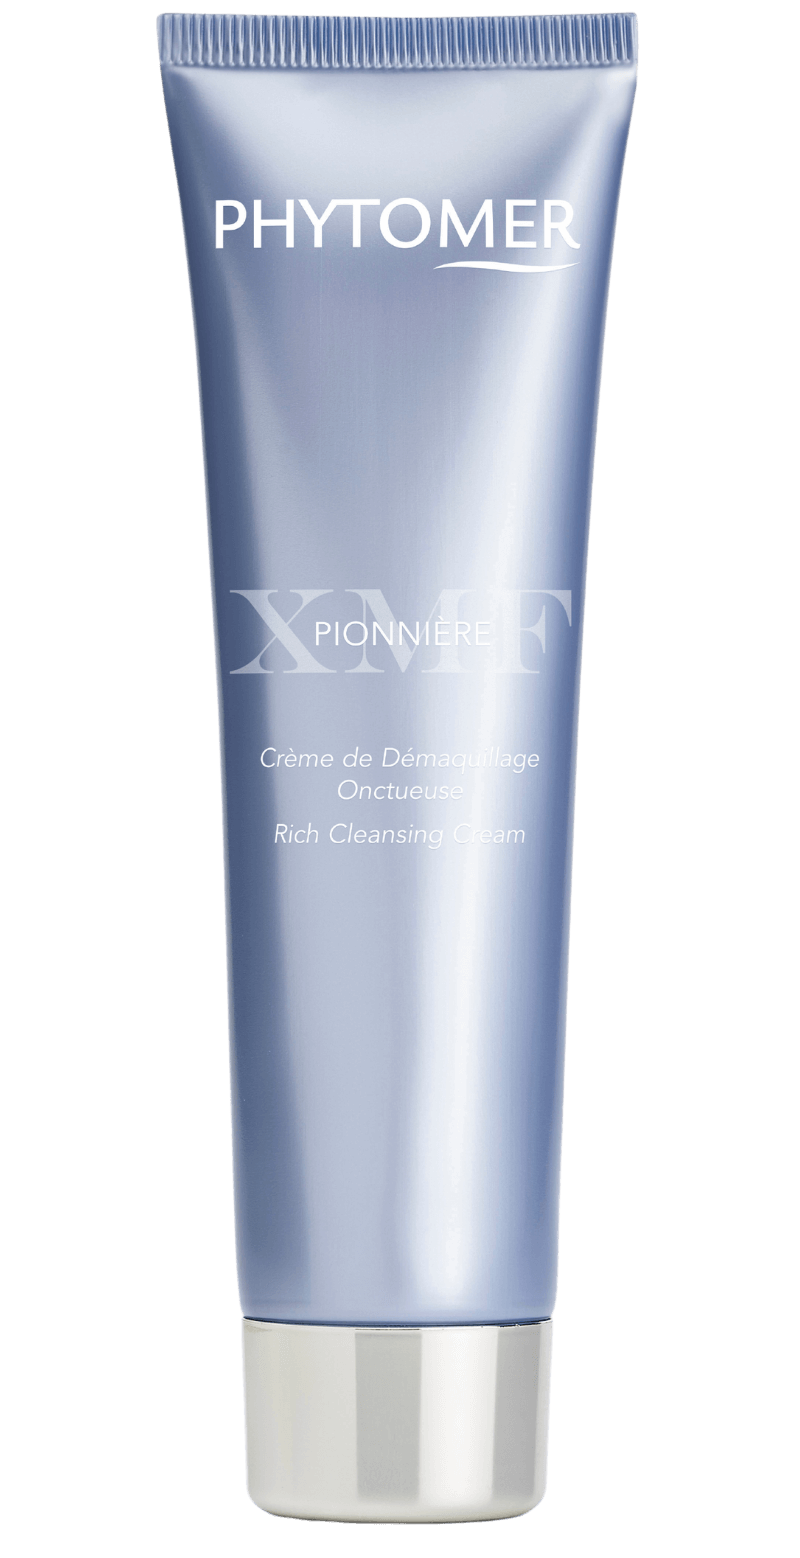 's Phytomer PIONNIERE XMF Rich Cleansing Cream - Bellini's Skin and Parfumerie 